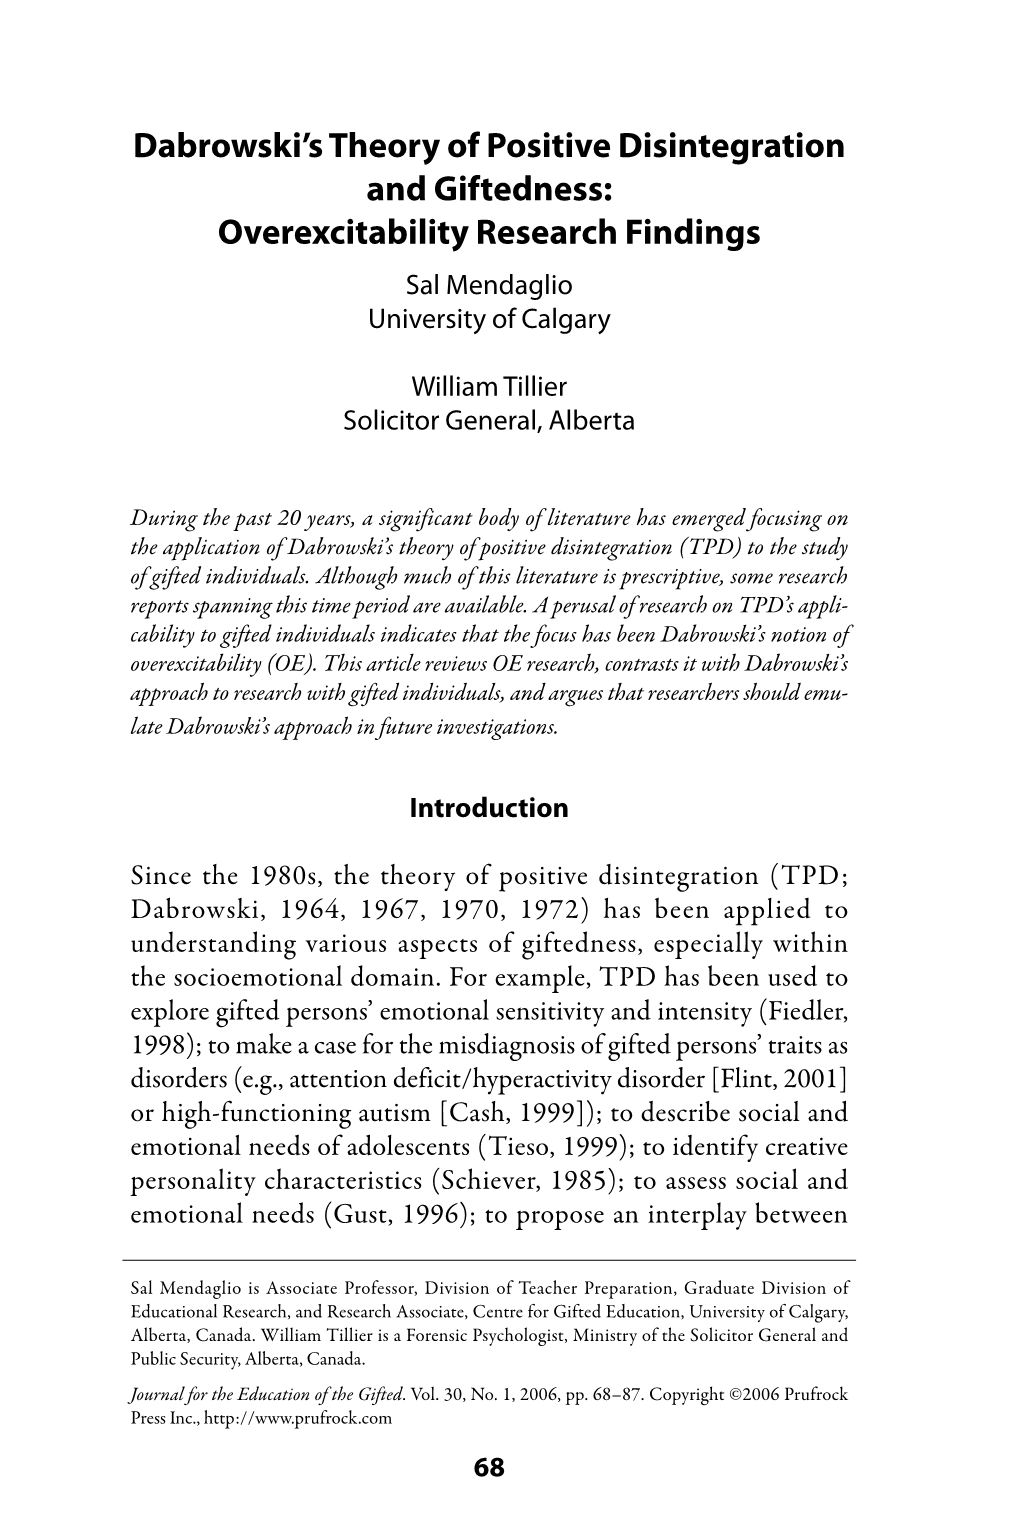 Dabrowski's Theory of Positive Disintegration and Giftedness: Overexcitability Research Findings